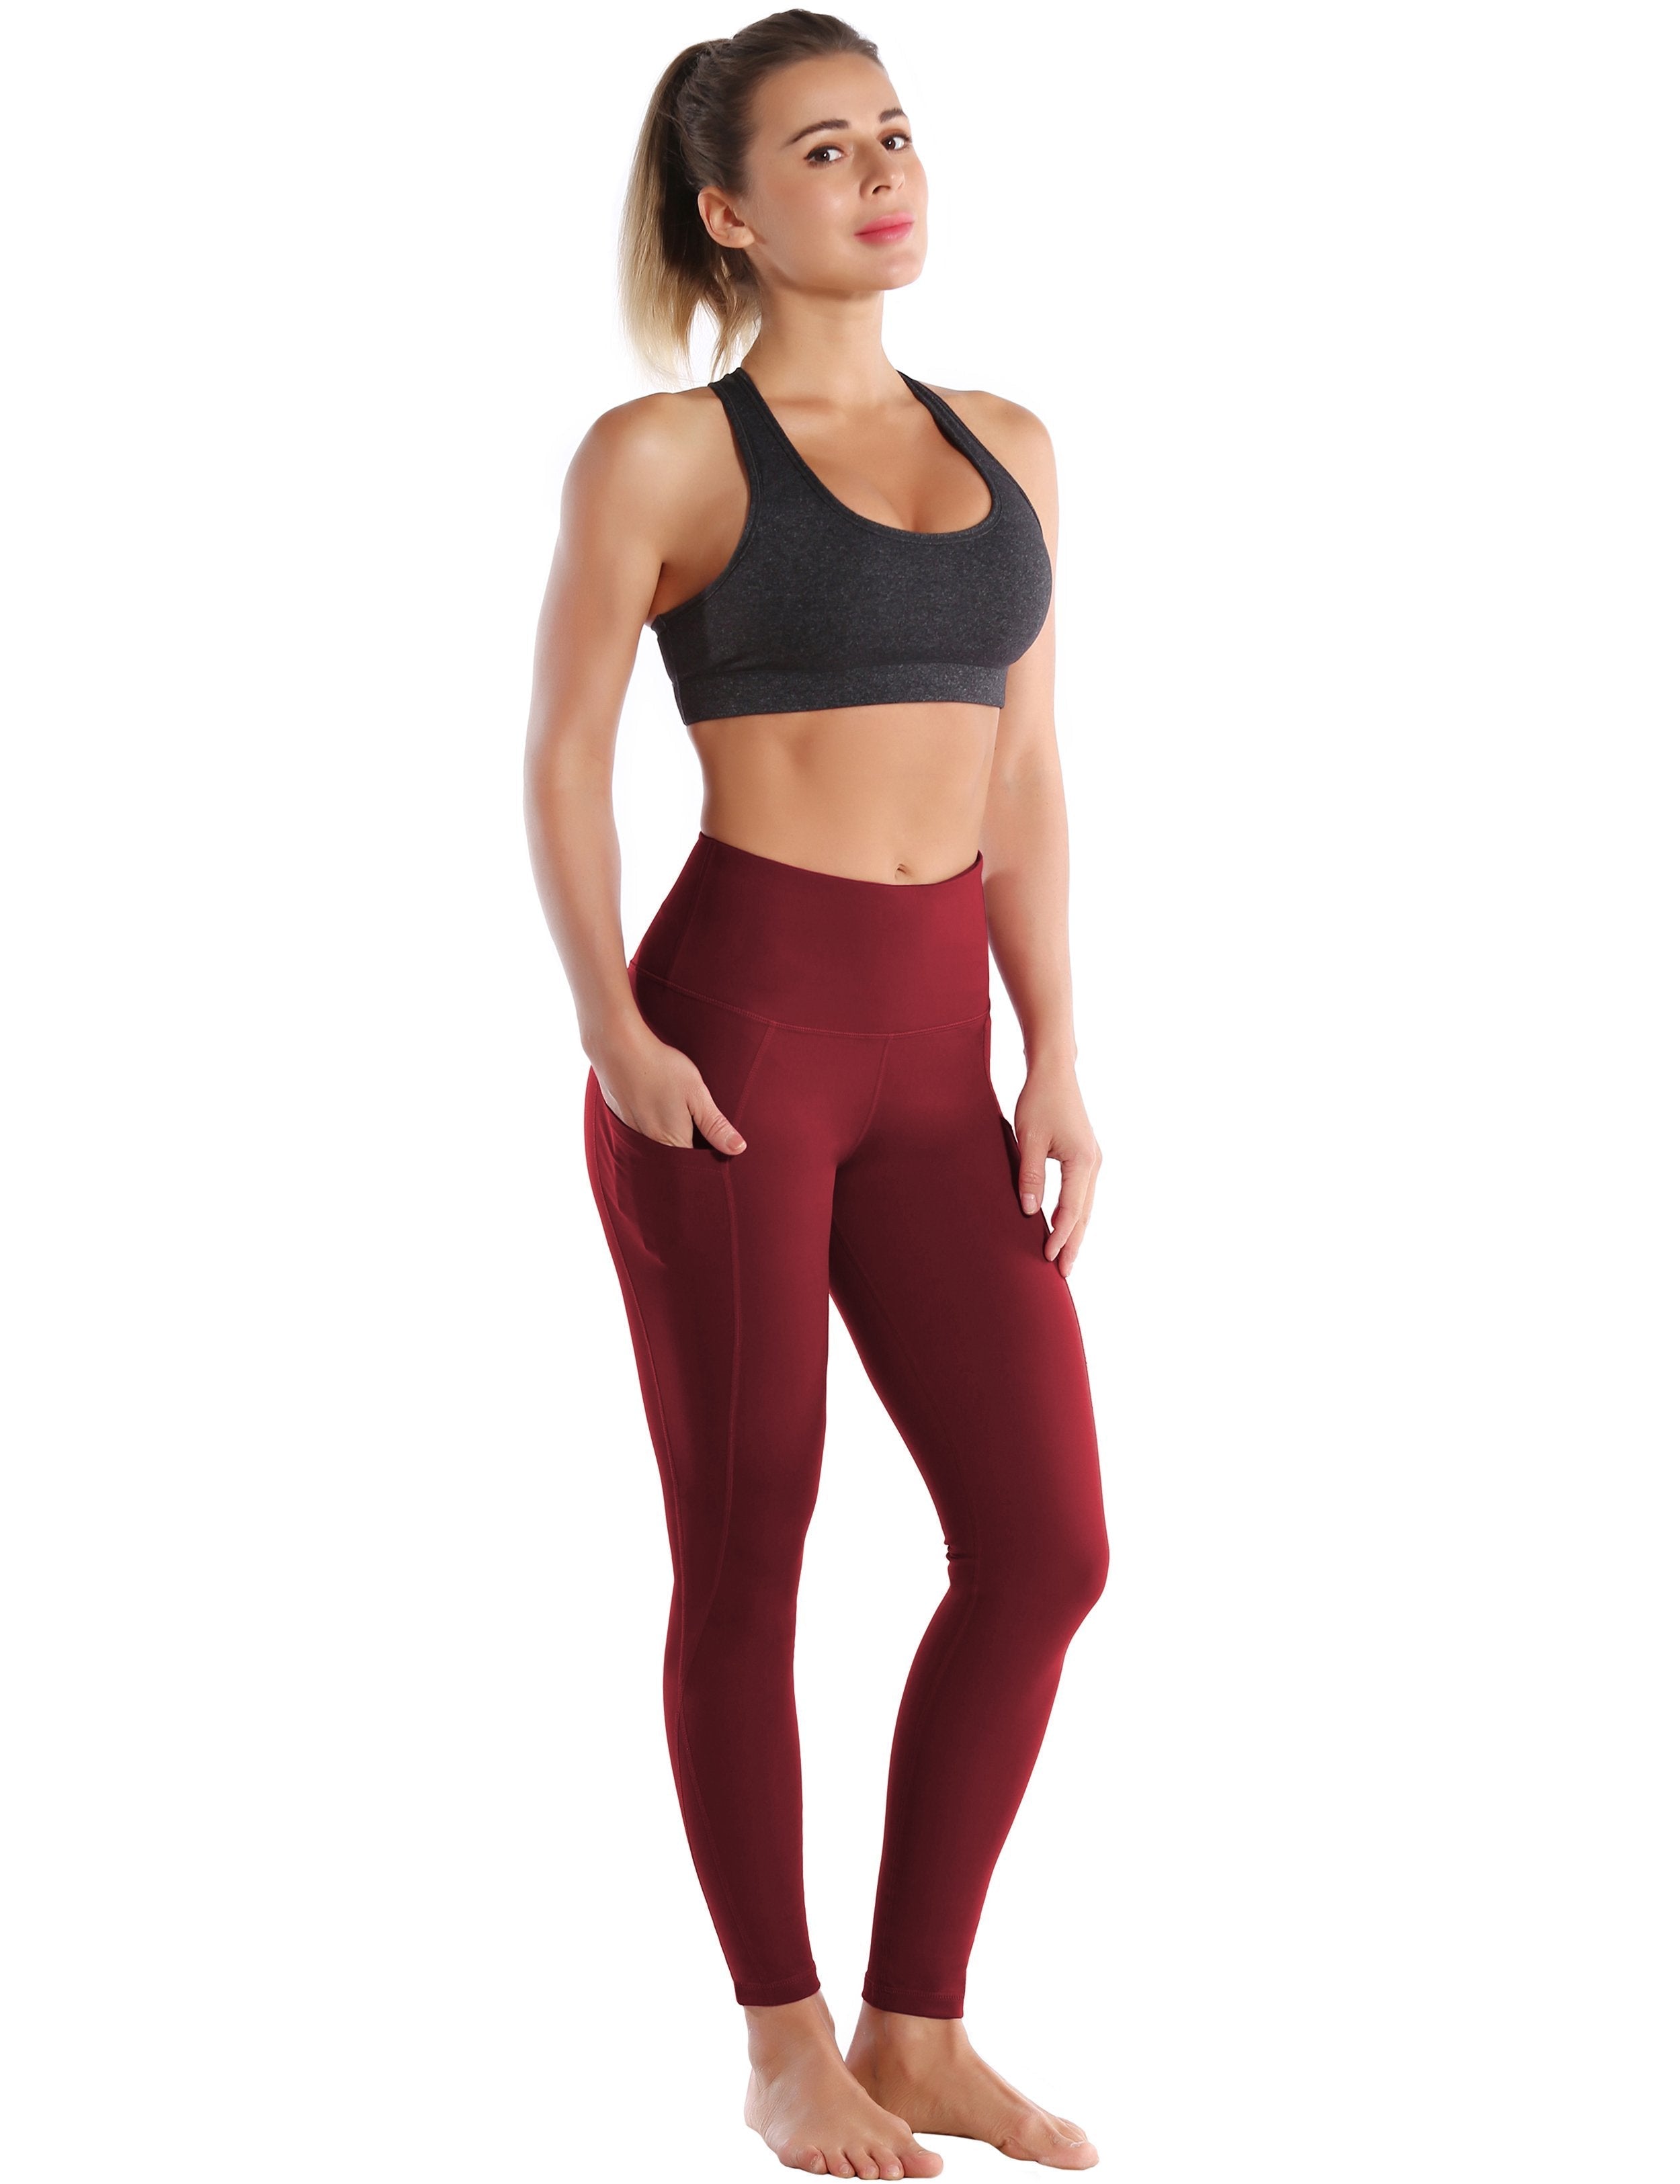 High Waist Side Pockets Running Pants cherryred 75% Nylon, 25% Spandex Fabric doesn't attract lint easily 4-way stretch No see-through Moisture-wicking Tummy control Inner pocket